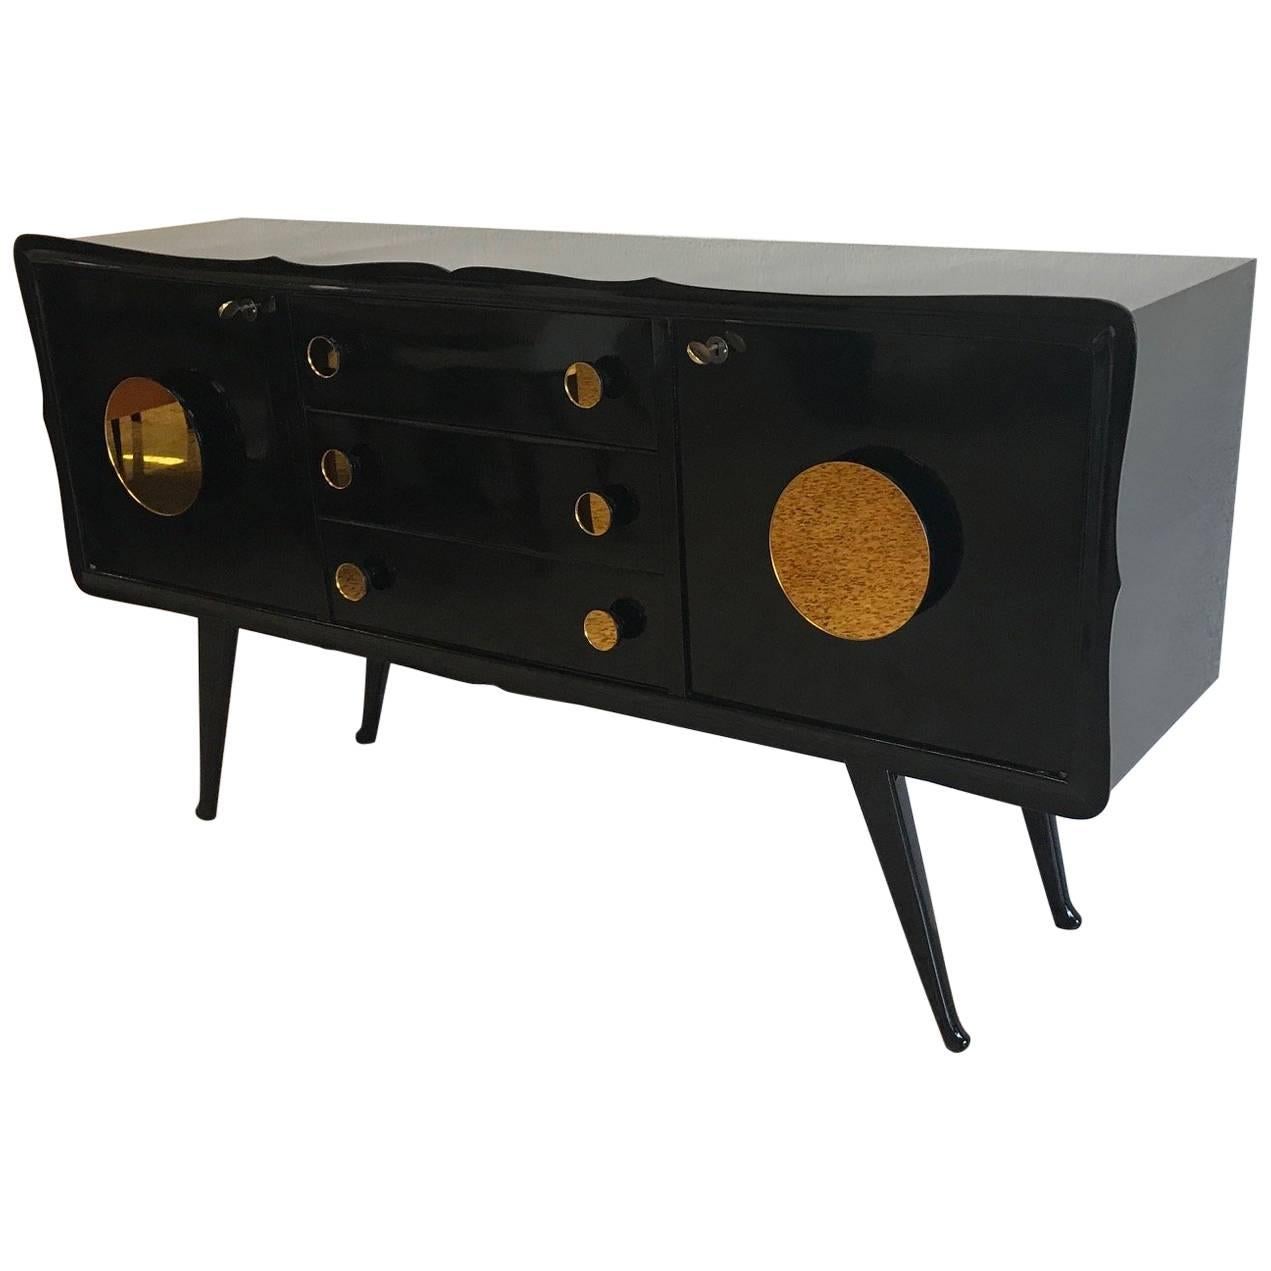 Fine Midcentury Black and Gold Mirror Sideboard